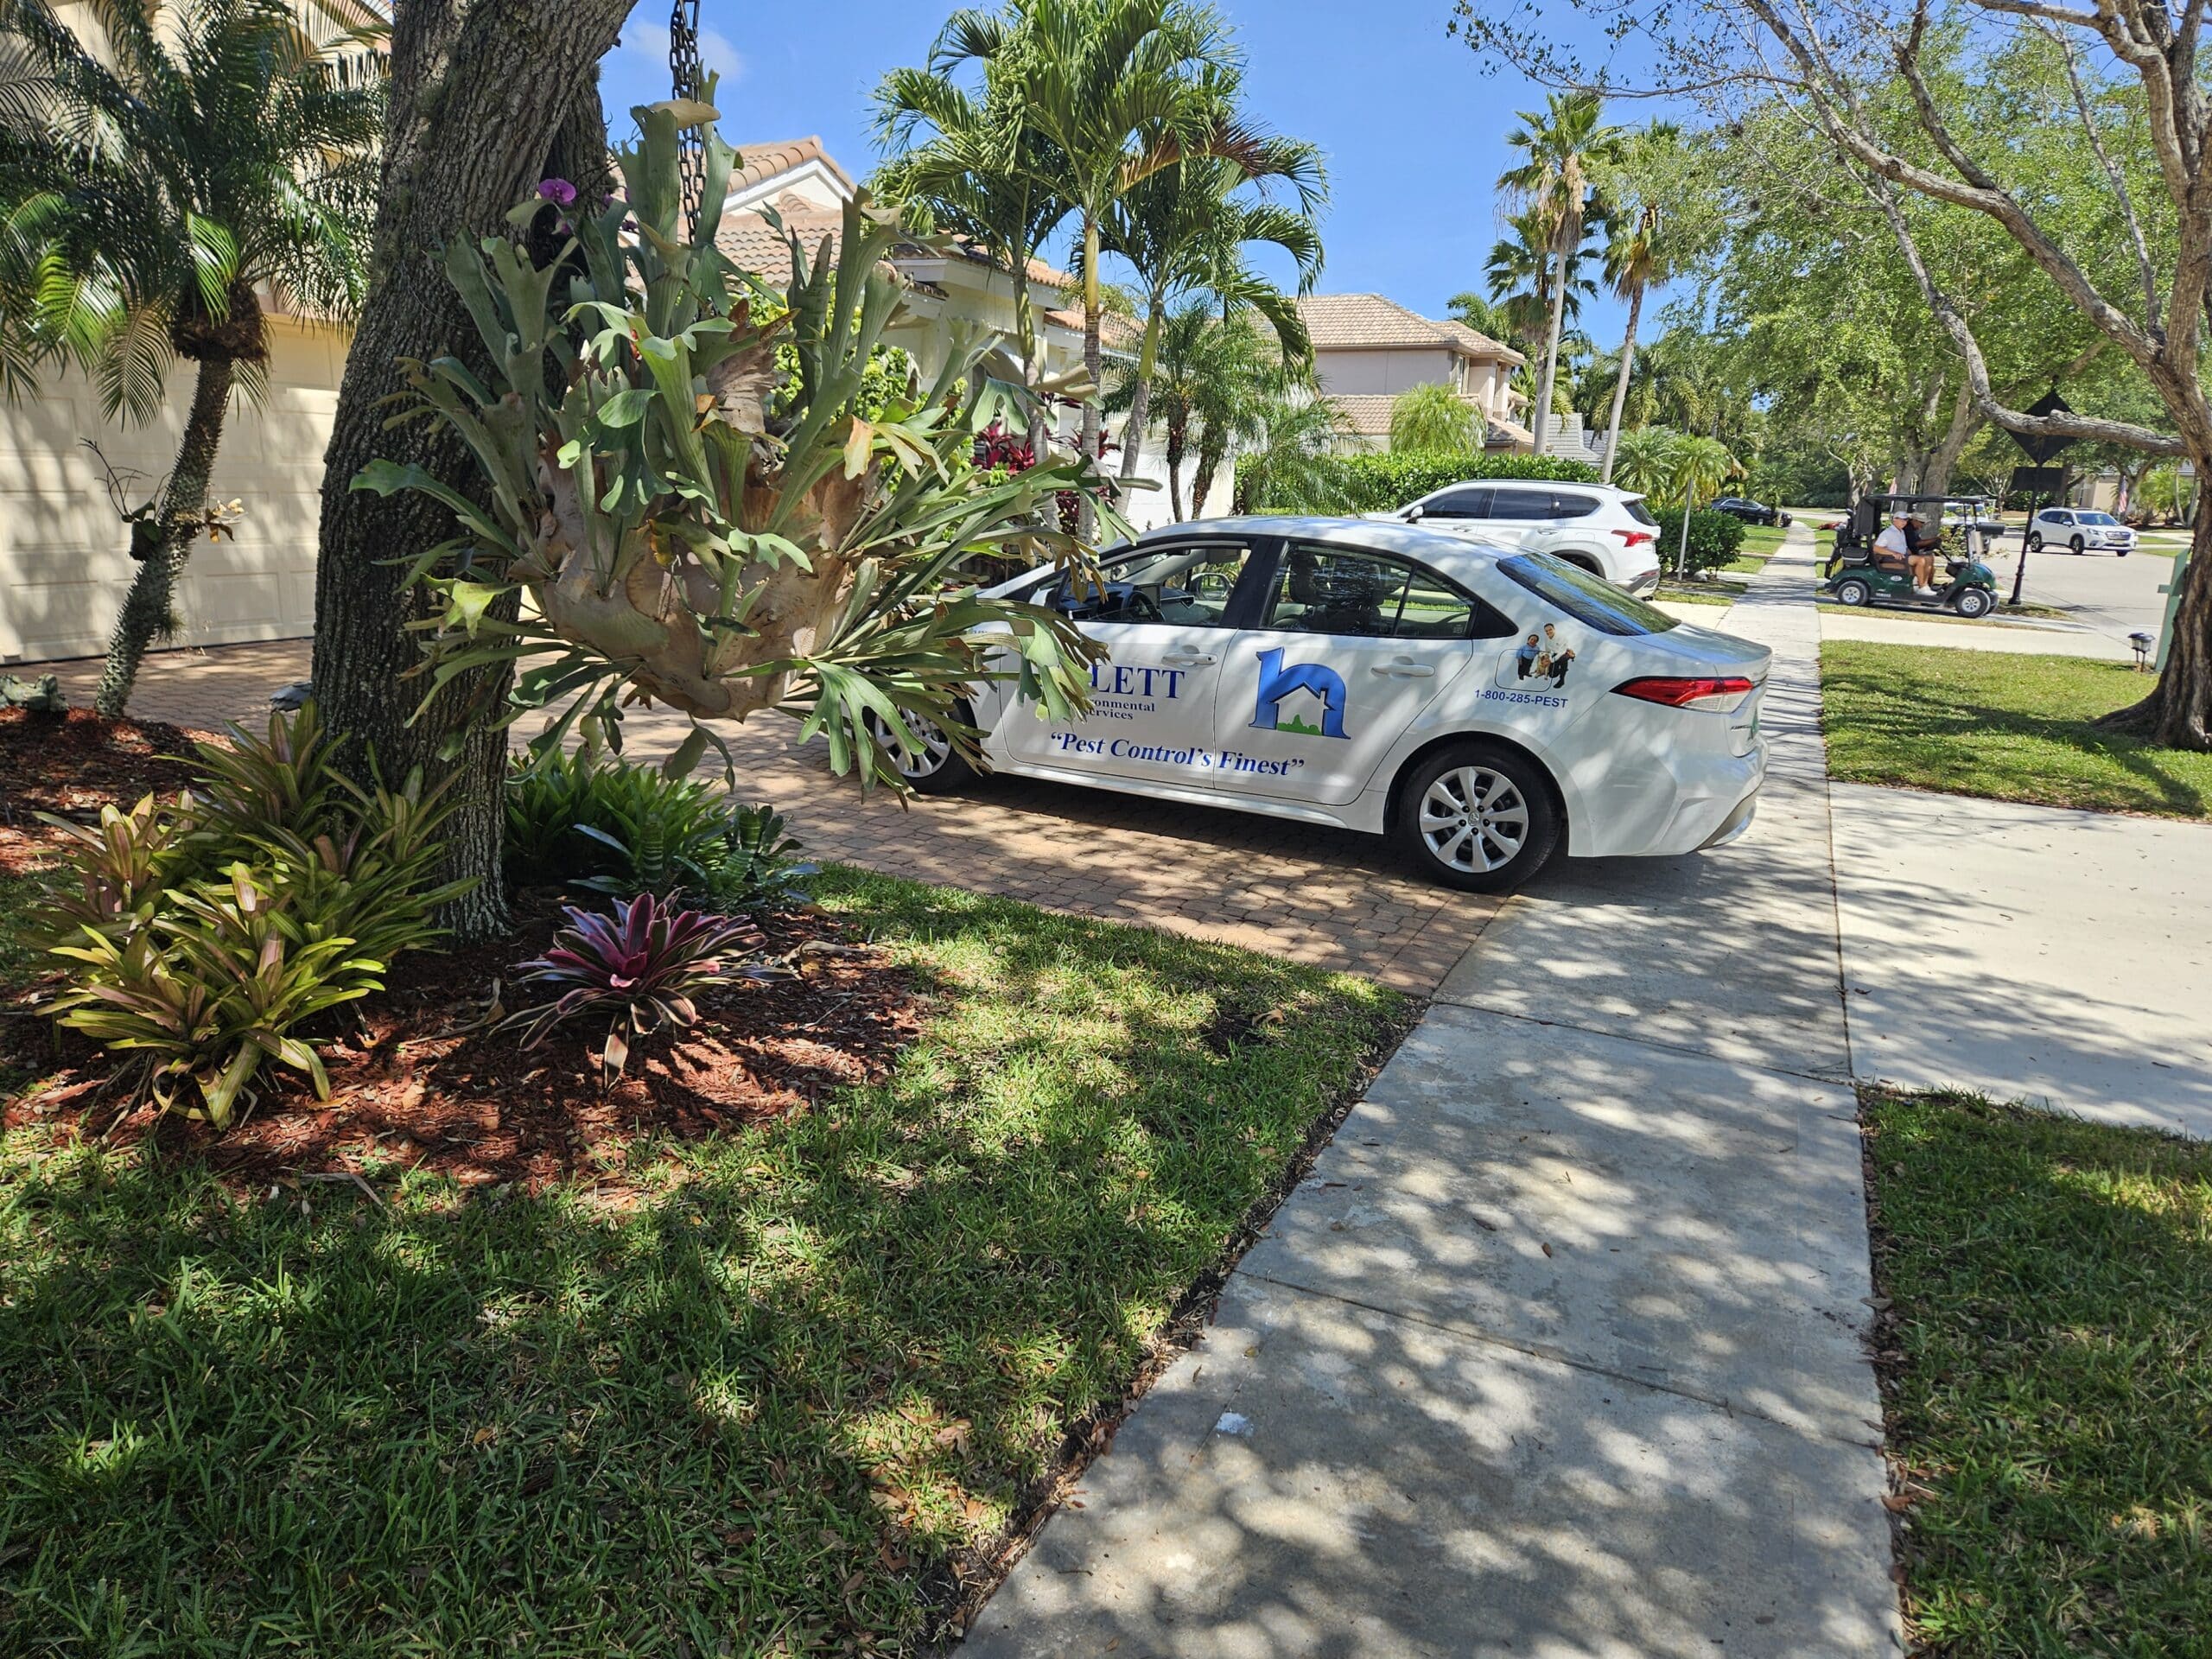 Hulett service car parked in a Port St. Lucie driveway ready to provide pest control services.